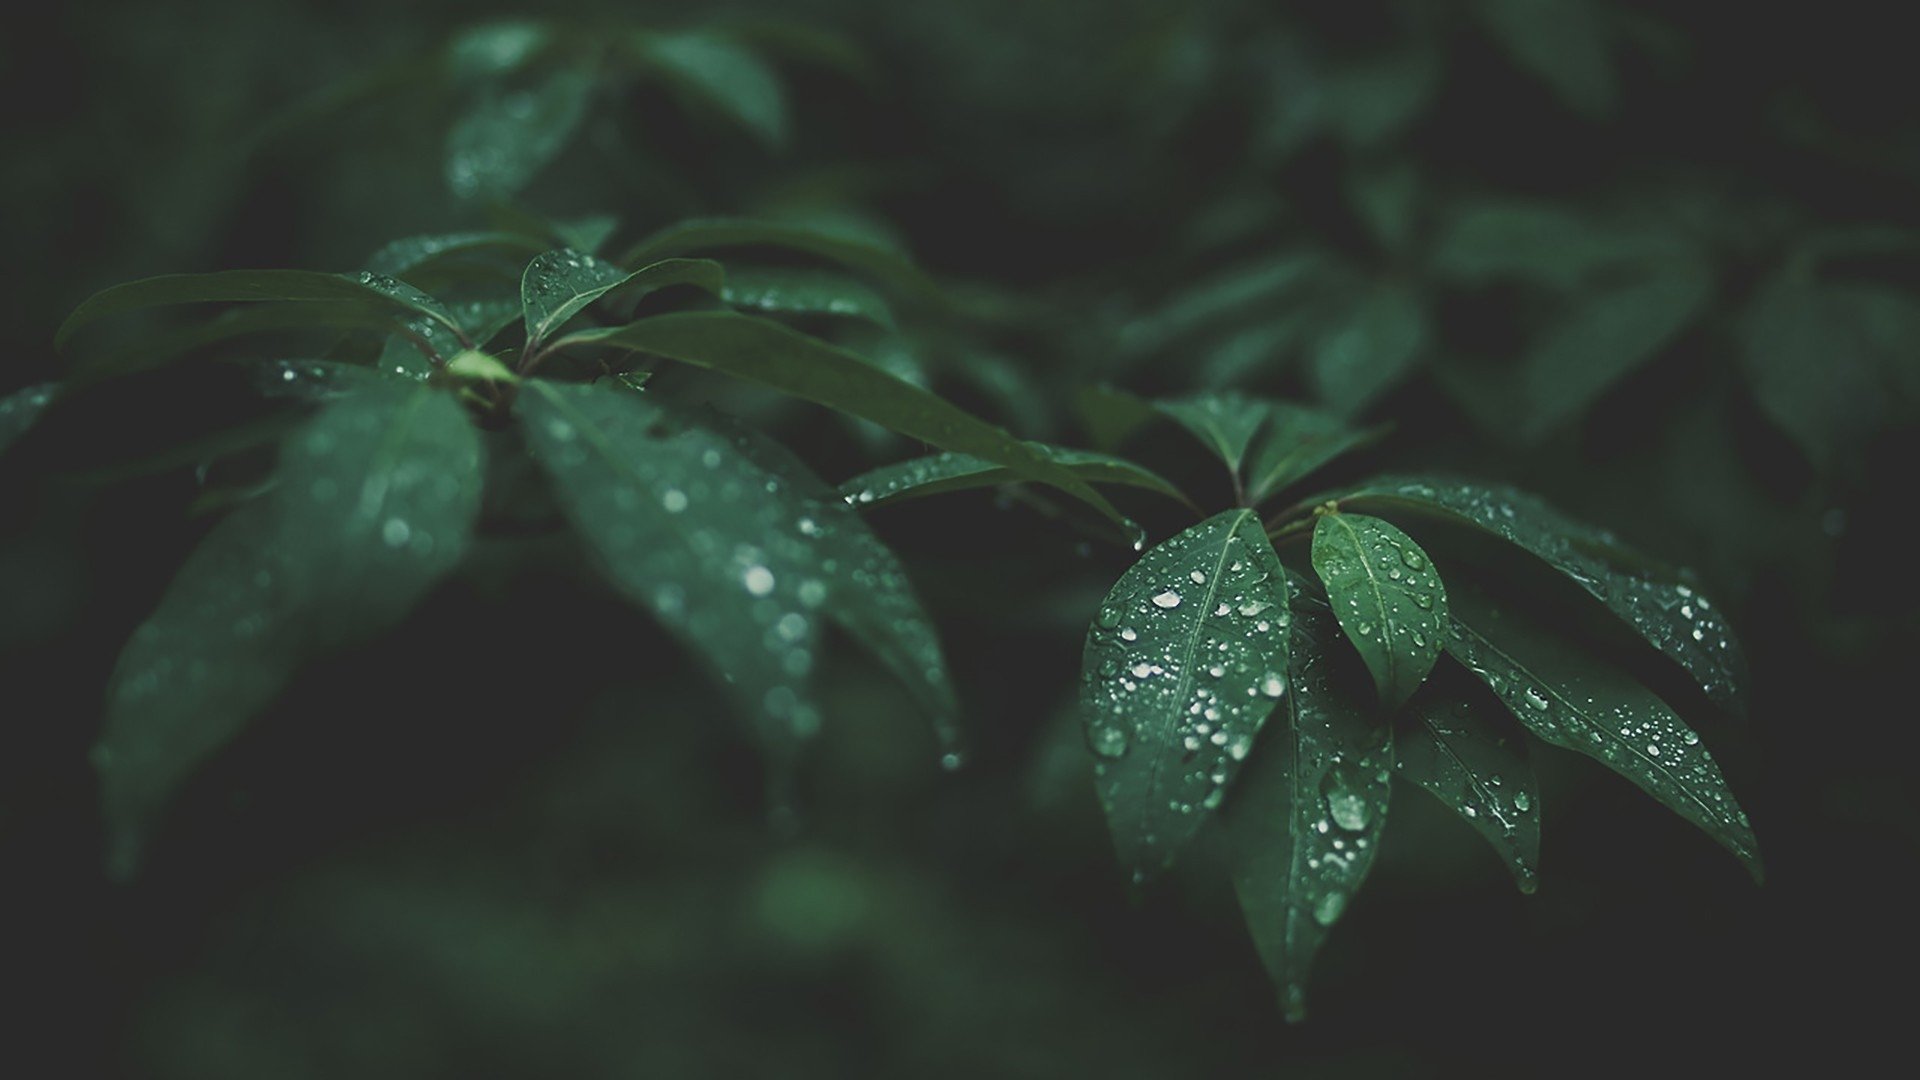 Green leaves with water droplets on them in a dark setting. - Photography